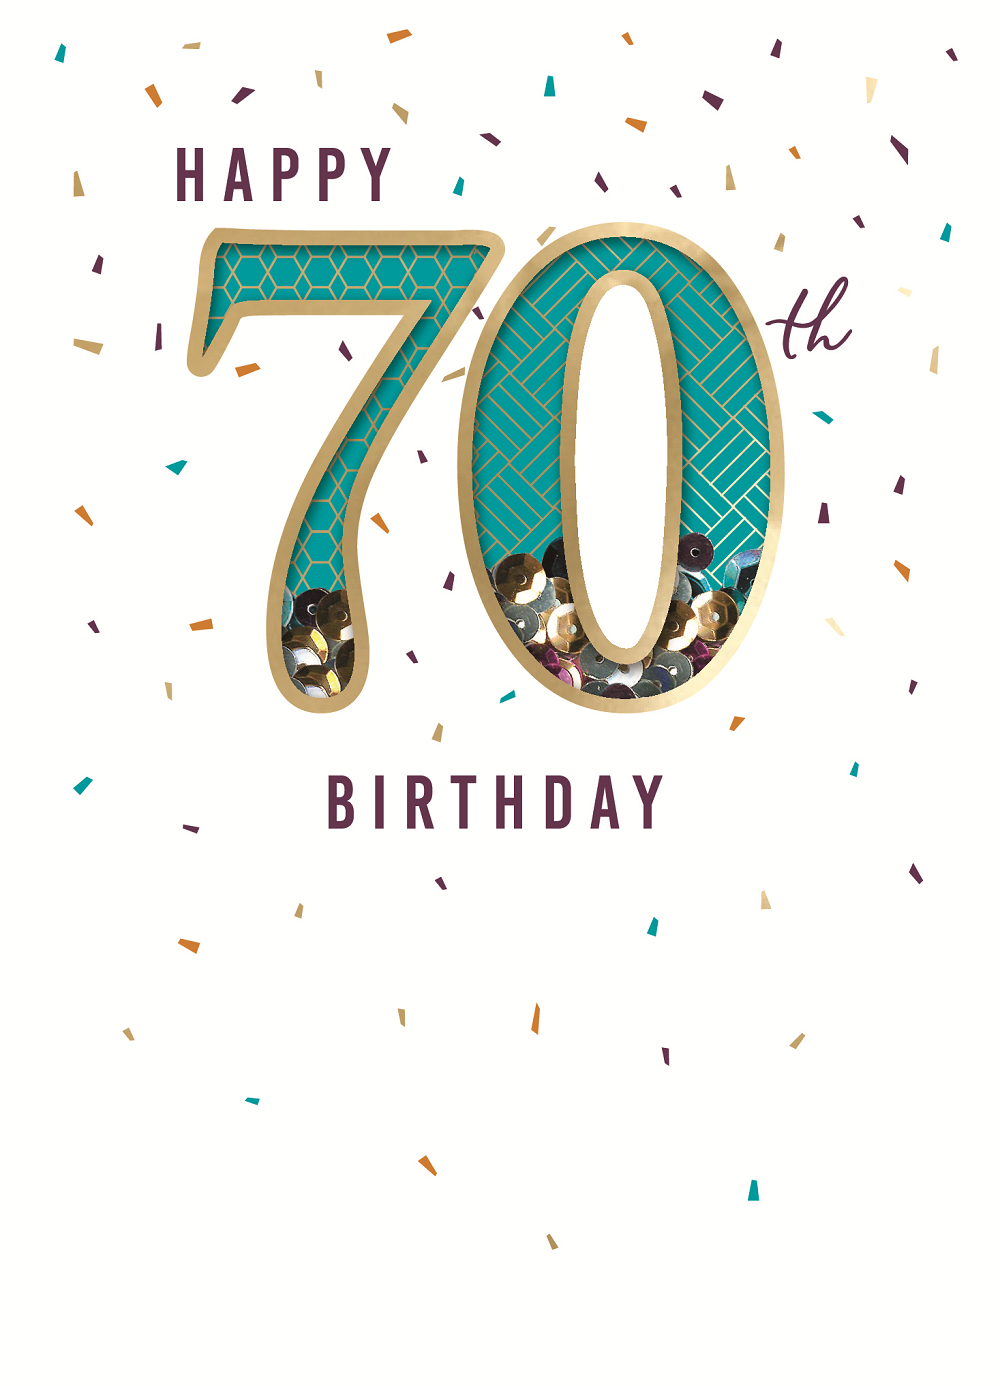 Happy 70th Birthday Sequins Embellished Birthday Greeting Card